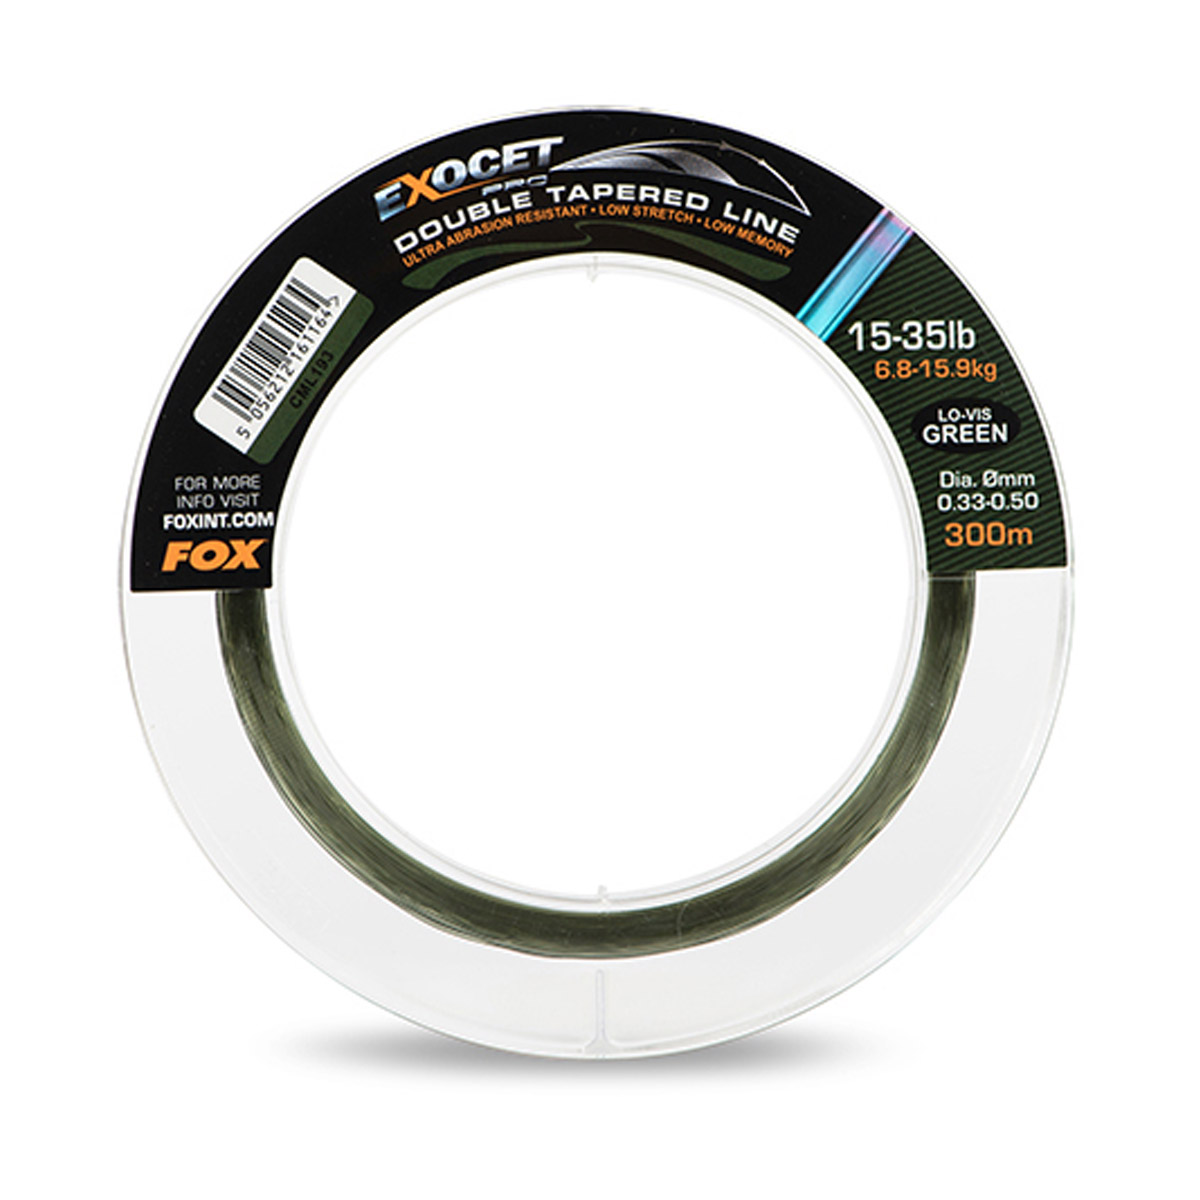 Fox Exocet Pro Double Tapered MainLine -  0.26 mm -  0.30 mm -  0.33 mm